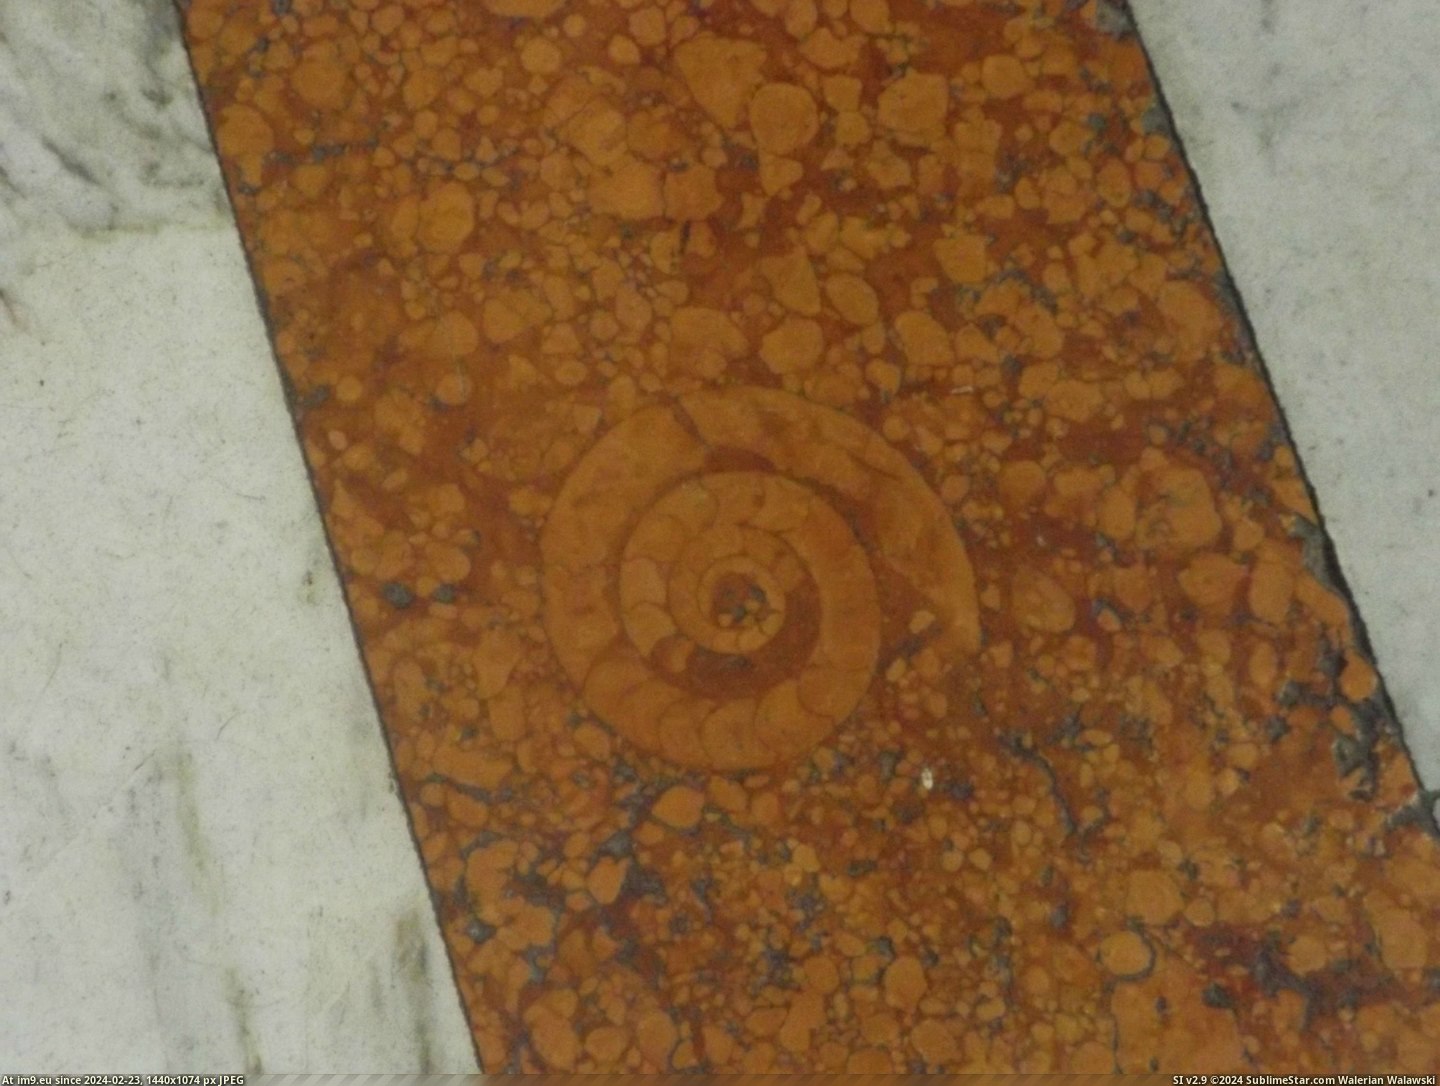 #Saw #Rome #Church #Marble #Fossil #Floor #Cut [Mildlyinteresting] Went to the Church of St Ignatius in Rome and saw this fossil cut in half in the marble on the floor Pic. (Image of album My r/MILDLYINTERESTING favs))